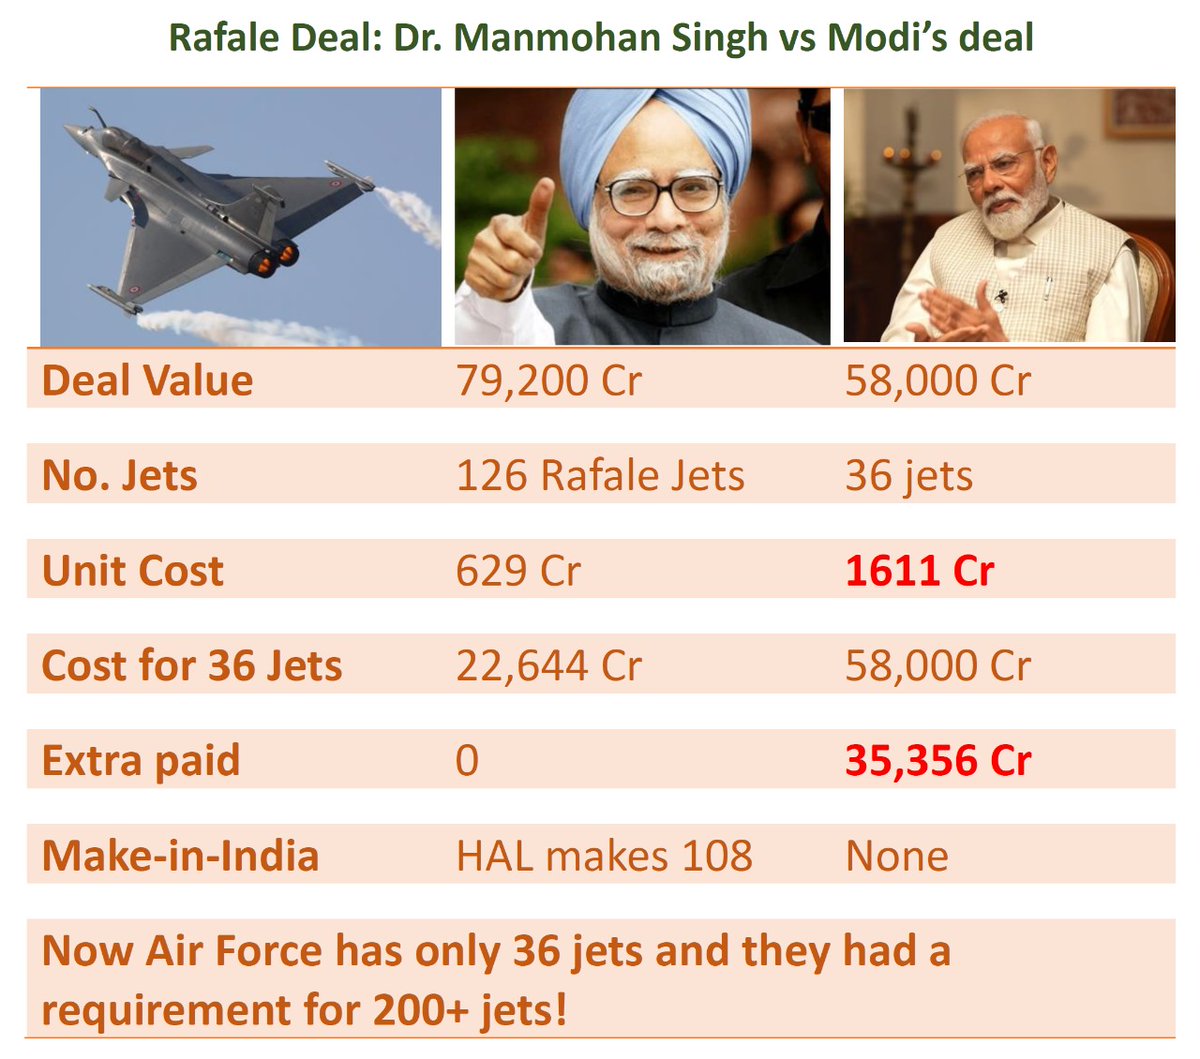 Never forget the Rafale deal. Our Air Force requested 200-300 Rafale jets and Dr. MMS ordered 126 with 108 to be manufactured in India by HAL with a unit cost of ₹629 Cr. Modi called this a scam and altered the deal for buying 36 jets at ₹1611 Cr per Jet and spent ₹58,000 Cr